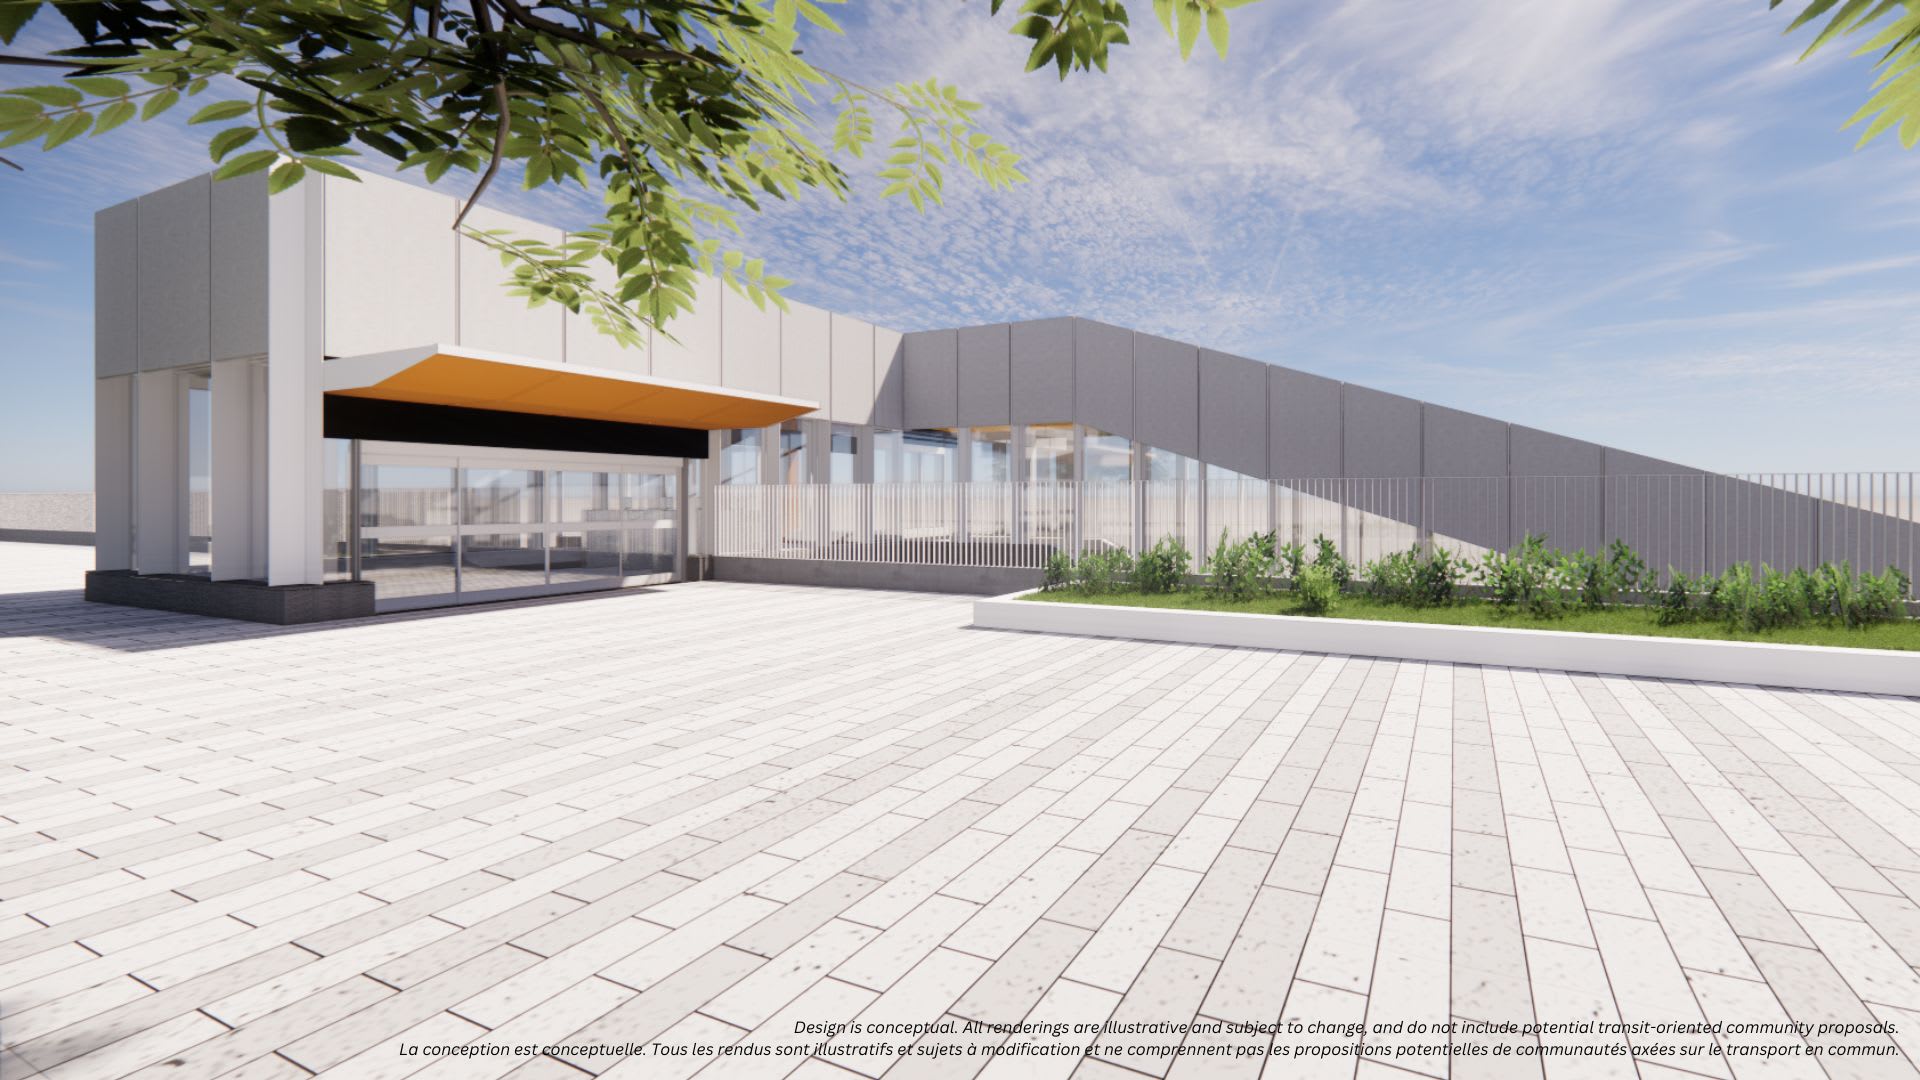 A conceptual rendering of Renforth Station